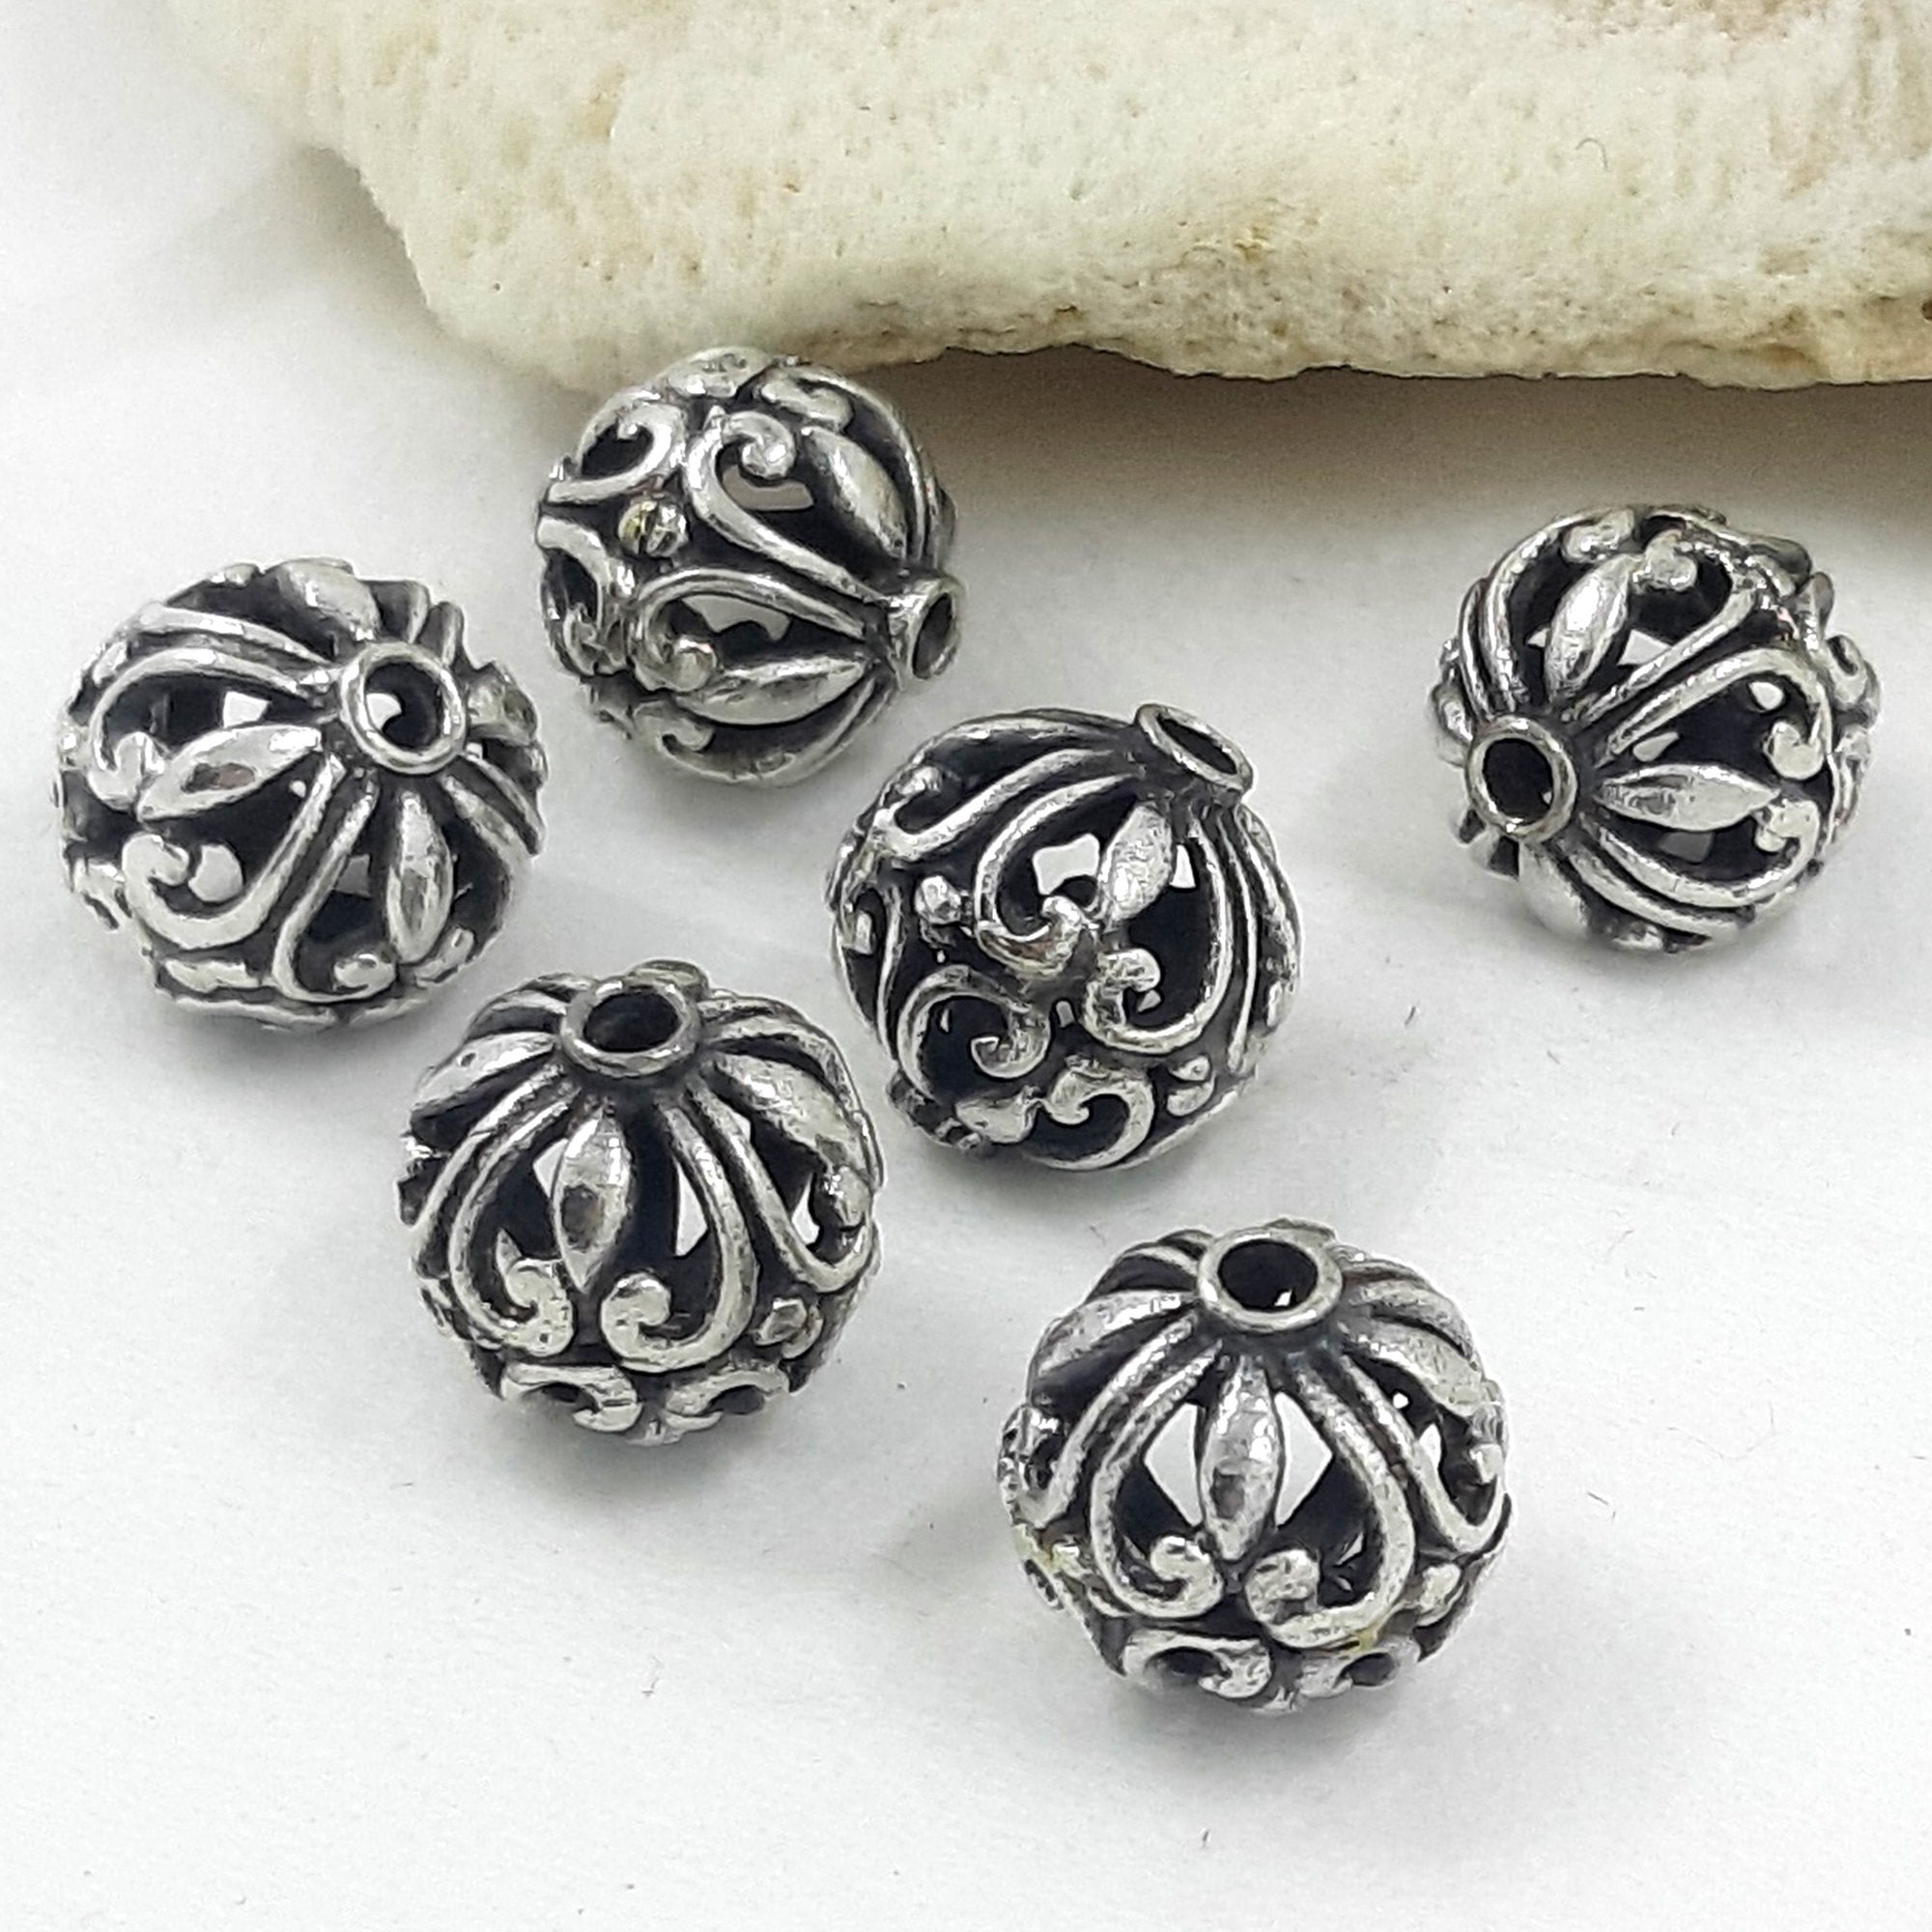 Bali Style Beads Sterling Silver Beads for Jewelry Making 10mm Inspire  Glass Studio 